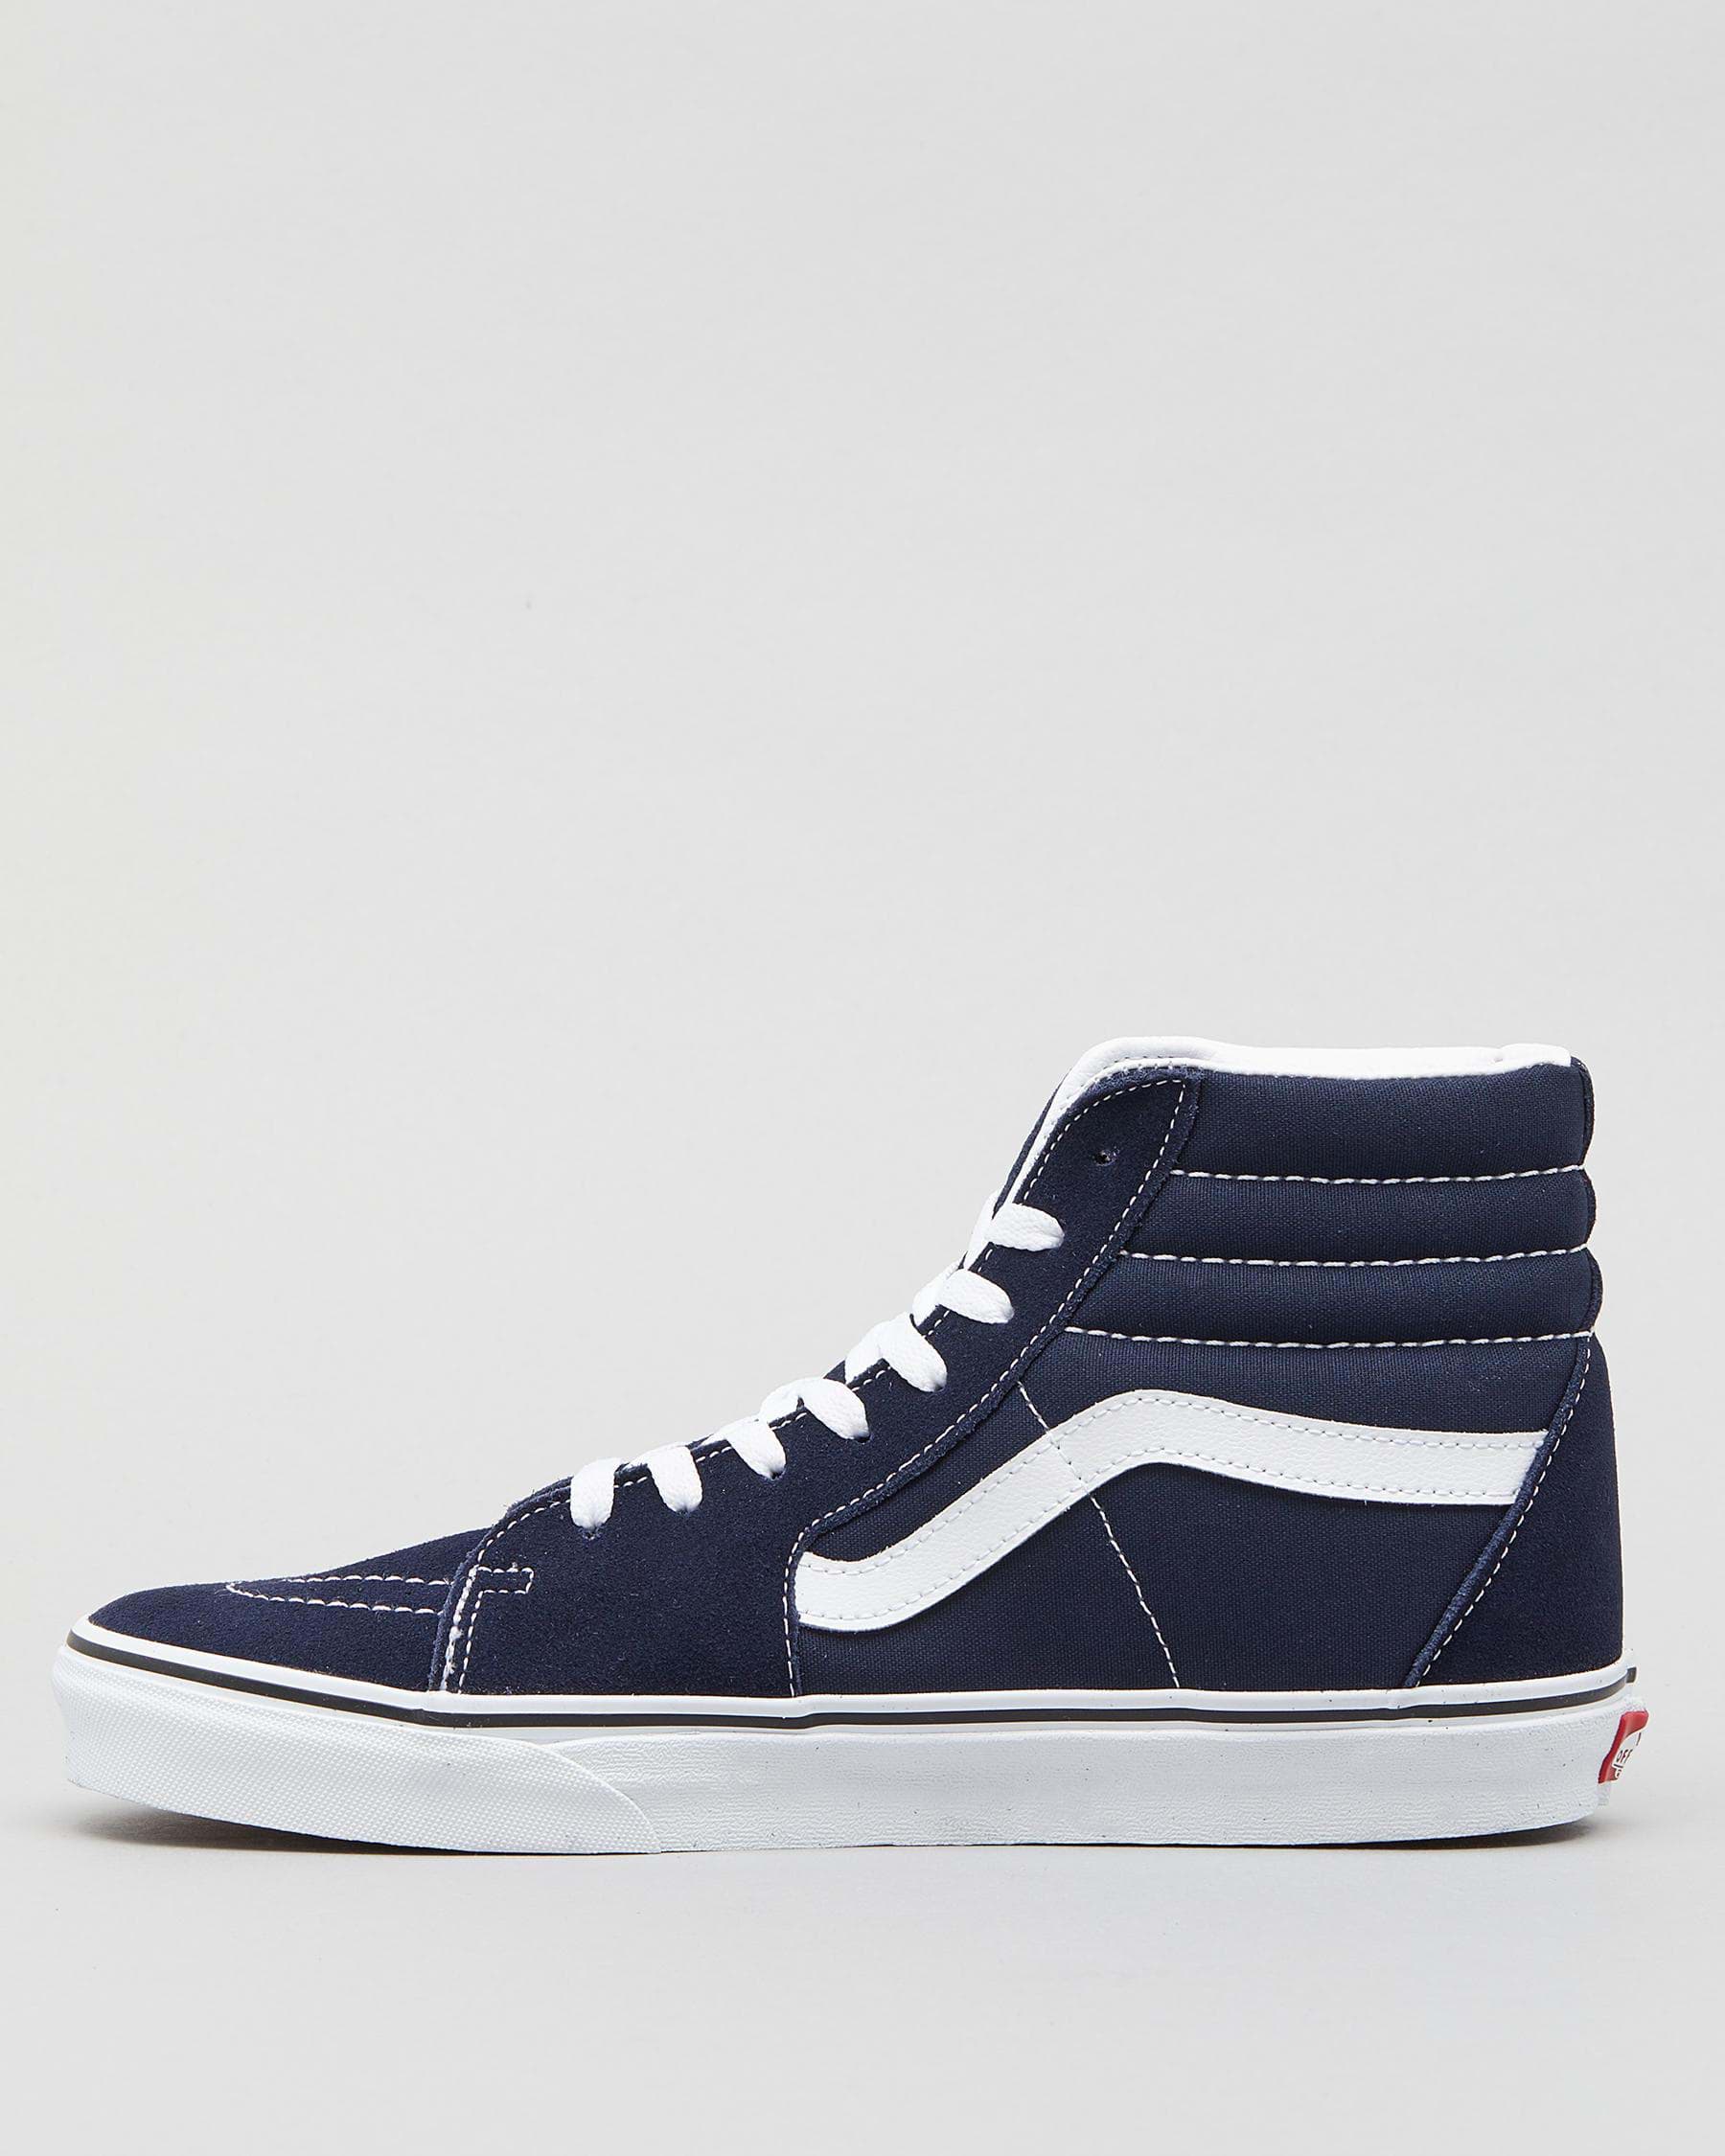 Vans Sk8-Hi Shoes In Parisian Night/true White - Fast Shipping & Easy ...